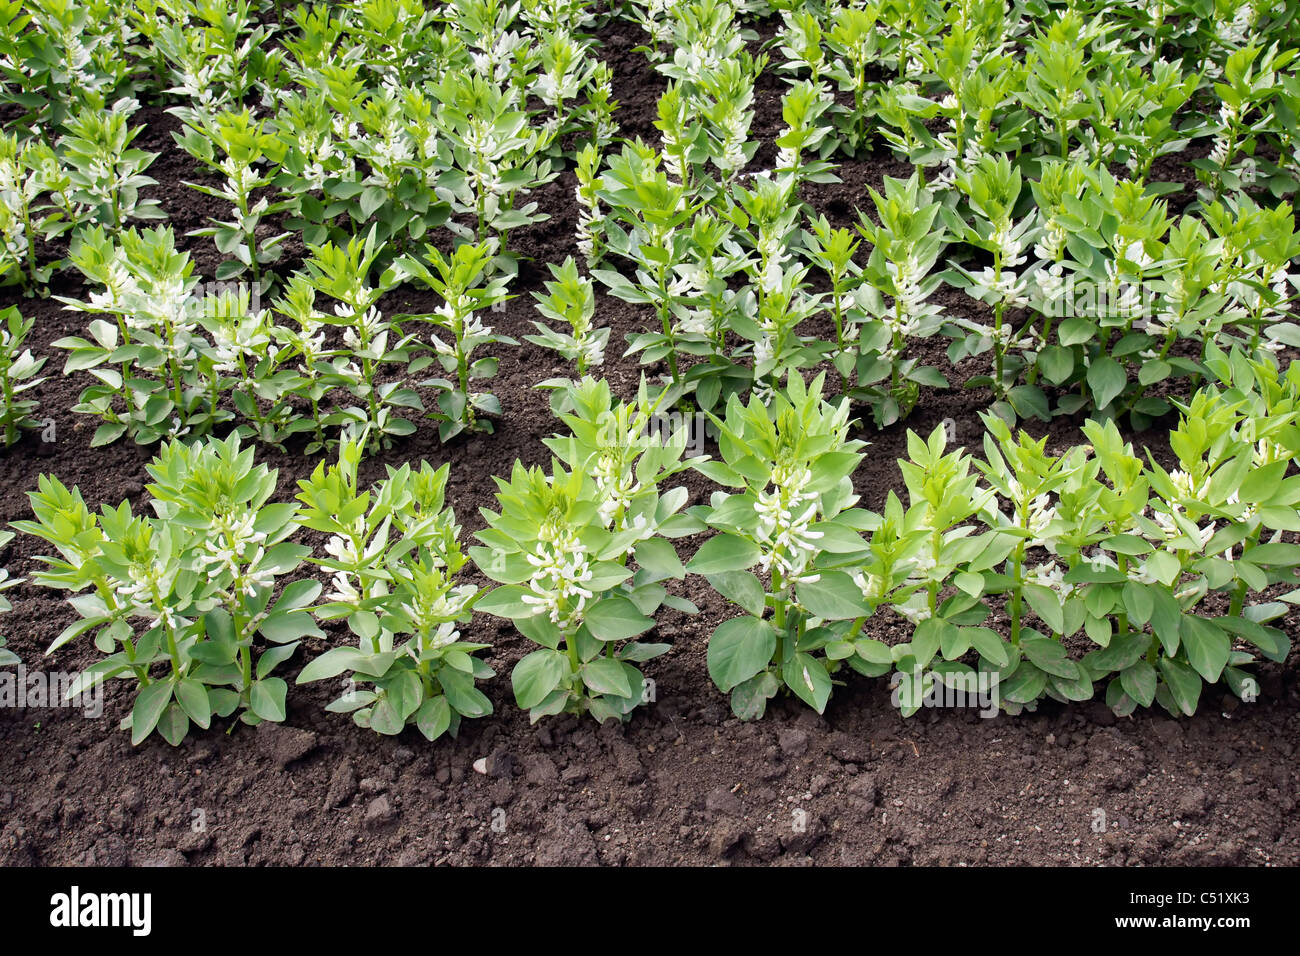 Agriculture background: cultivated field or garden of fava or broad bean (Vicia faba) with rows of the white bloom plant. Stock Photo